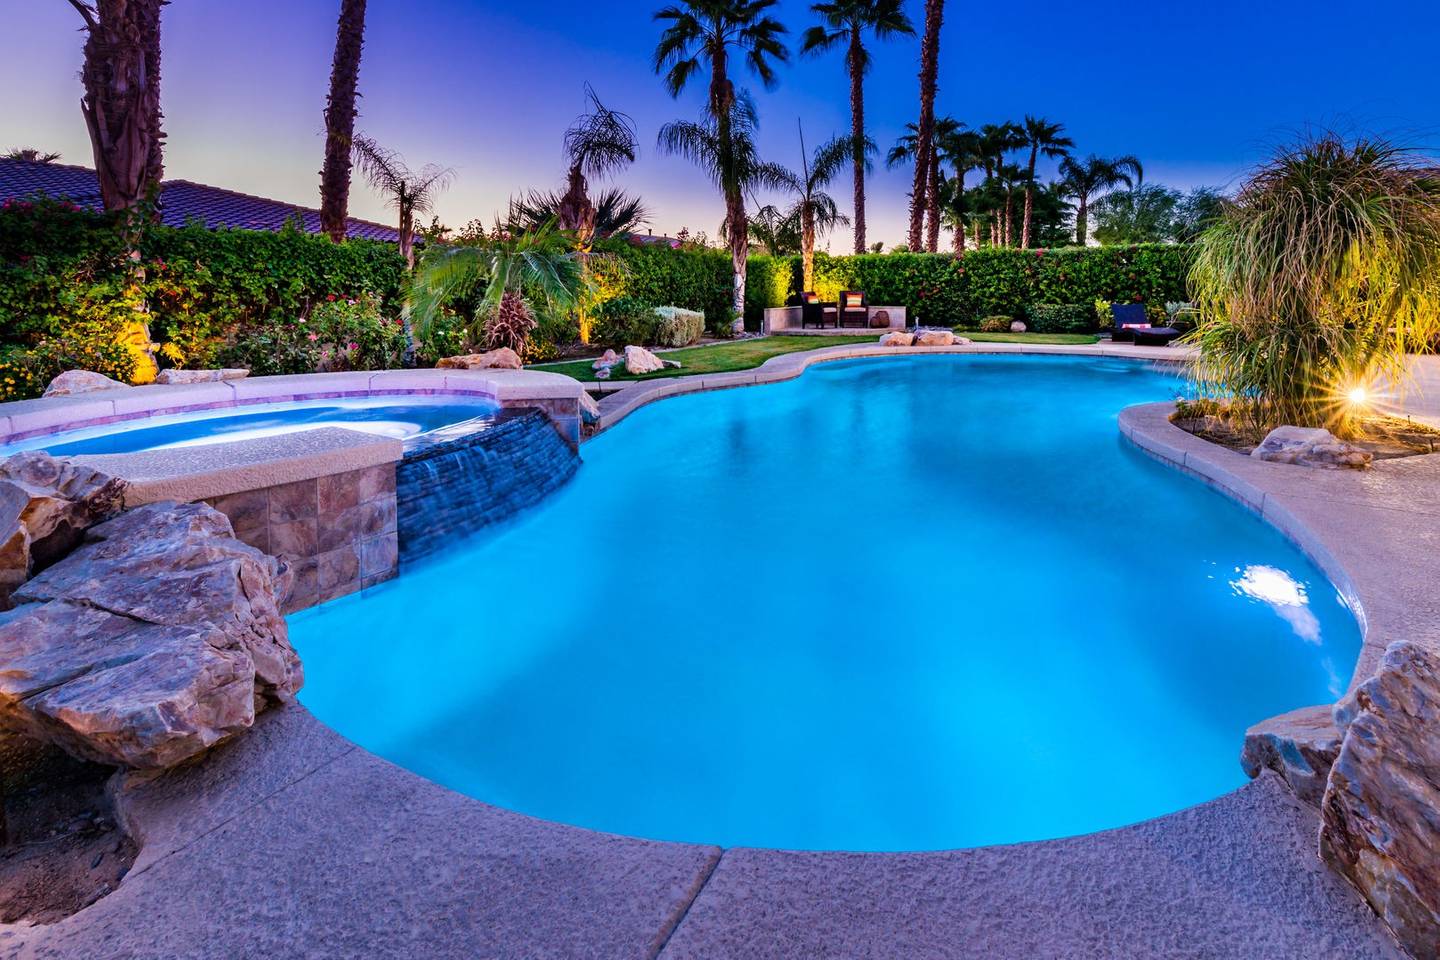 indio airbnb with pool and putting green close to coachella festival